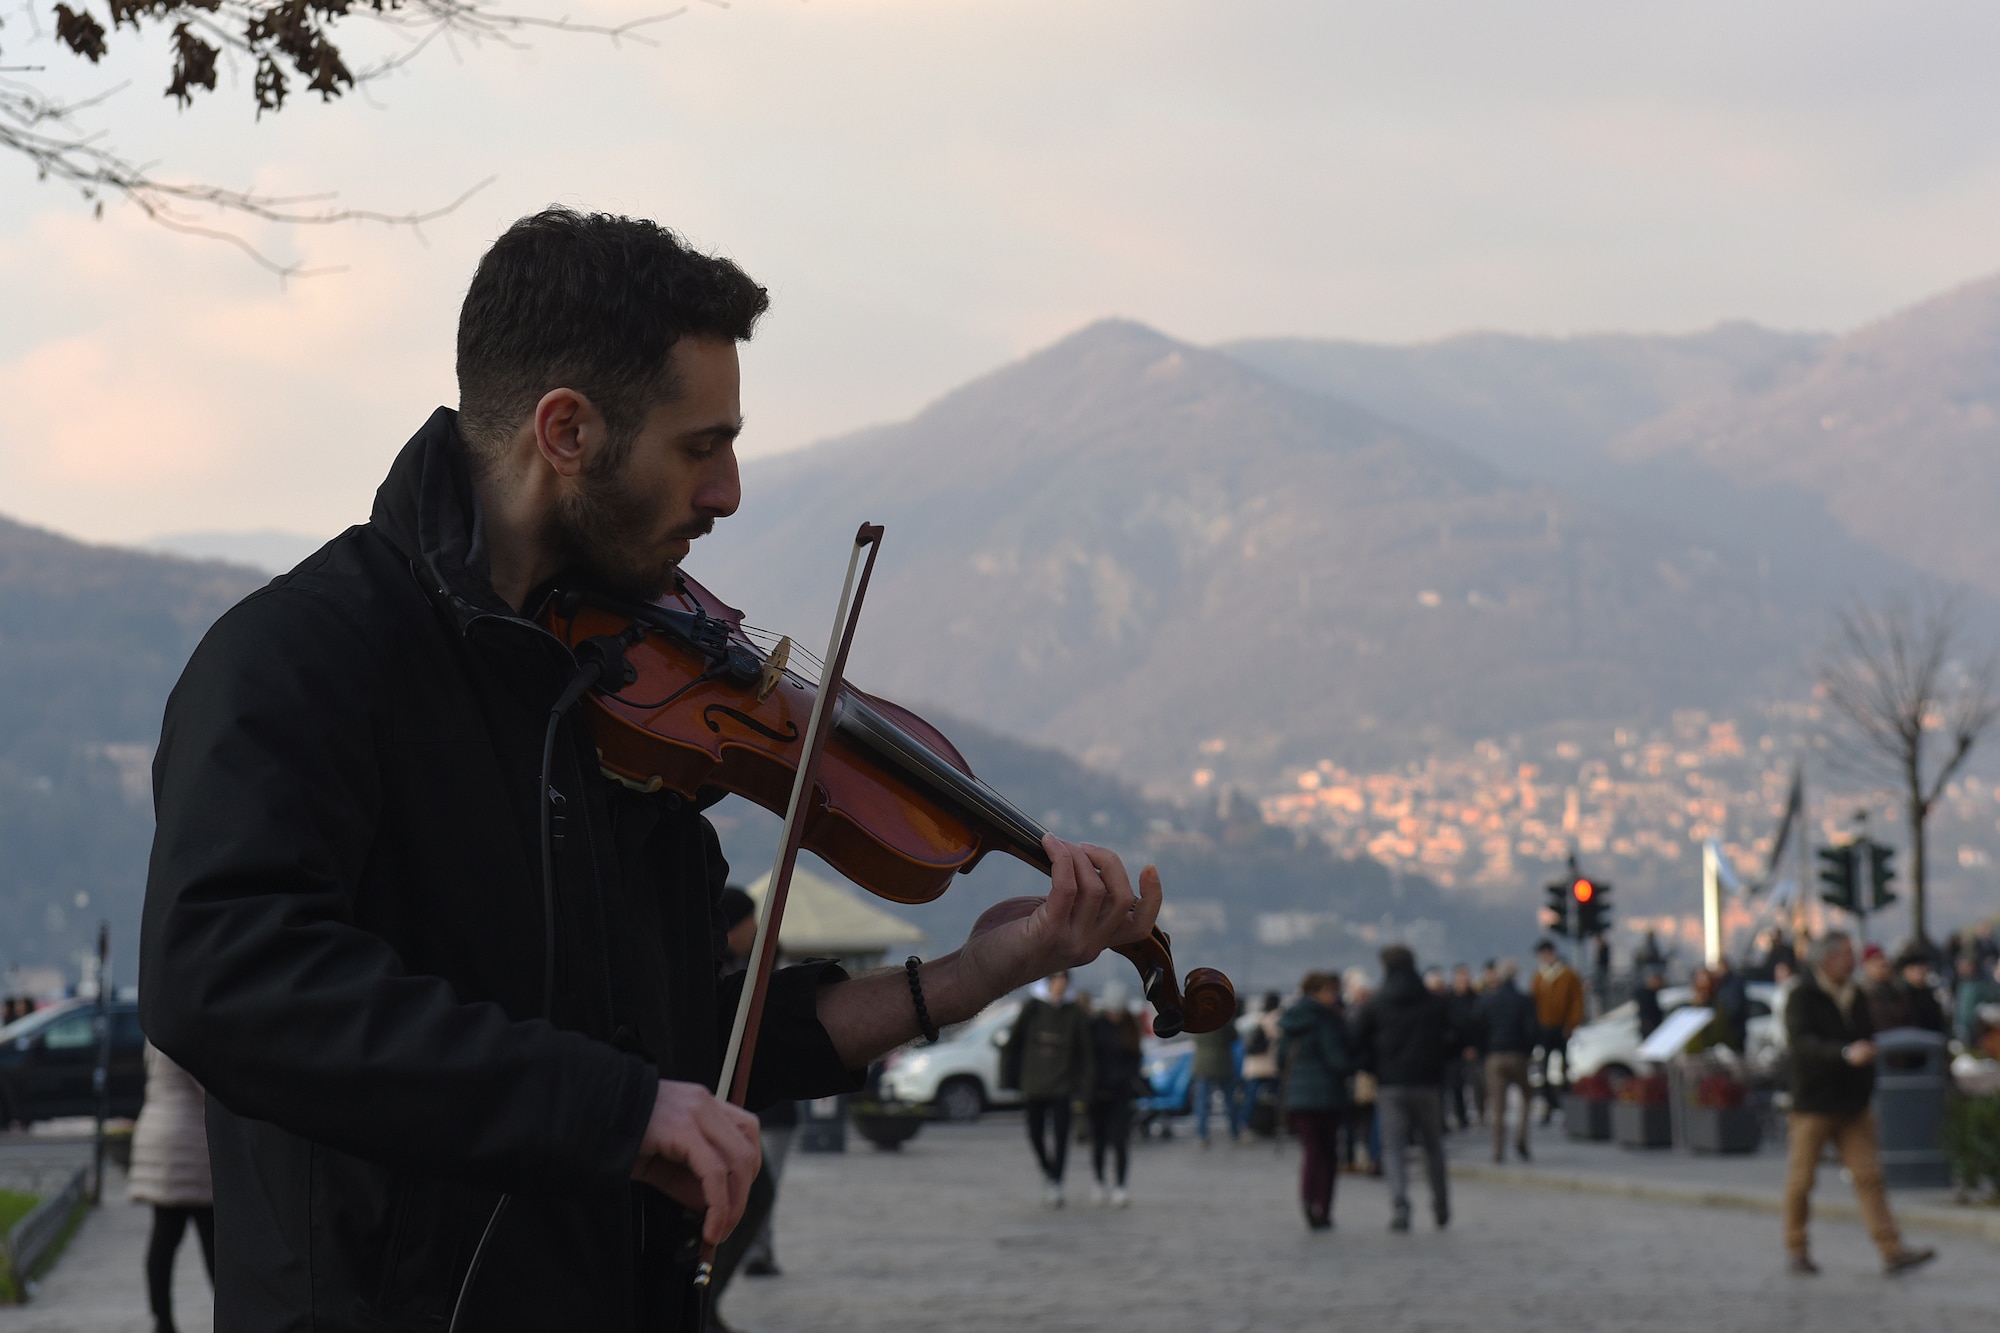 A musician plays the violin in Como, Italy, Jan. 20, 2019. Como is home to Renaissance architecture and a funicular that travels up to the mountain town of Brunate. (U.S. Air Force photo by Airman 1st Class Madeline Herzog)